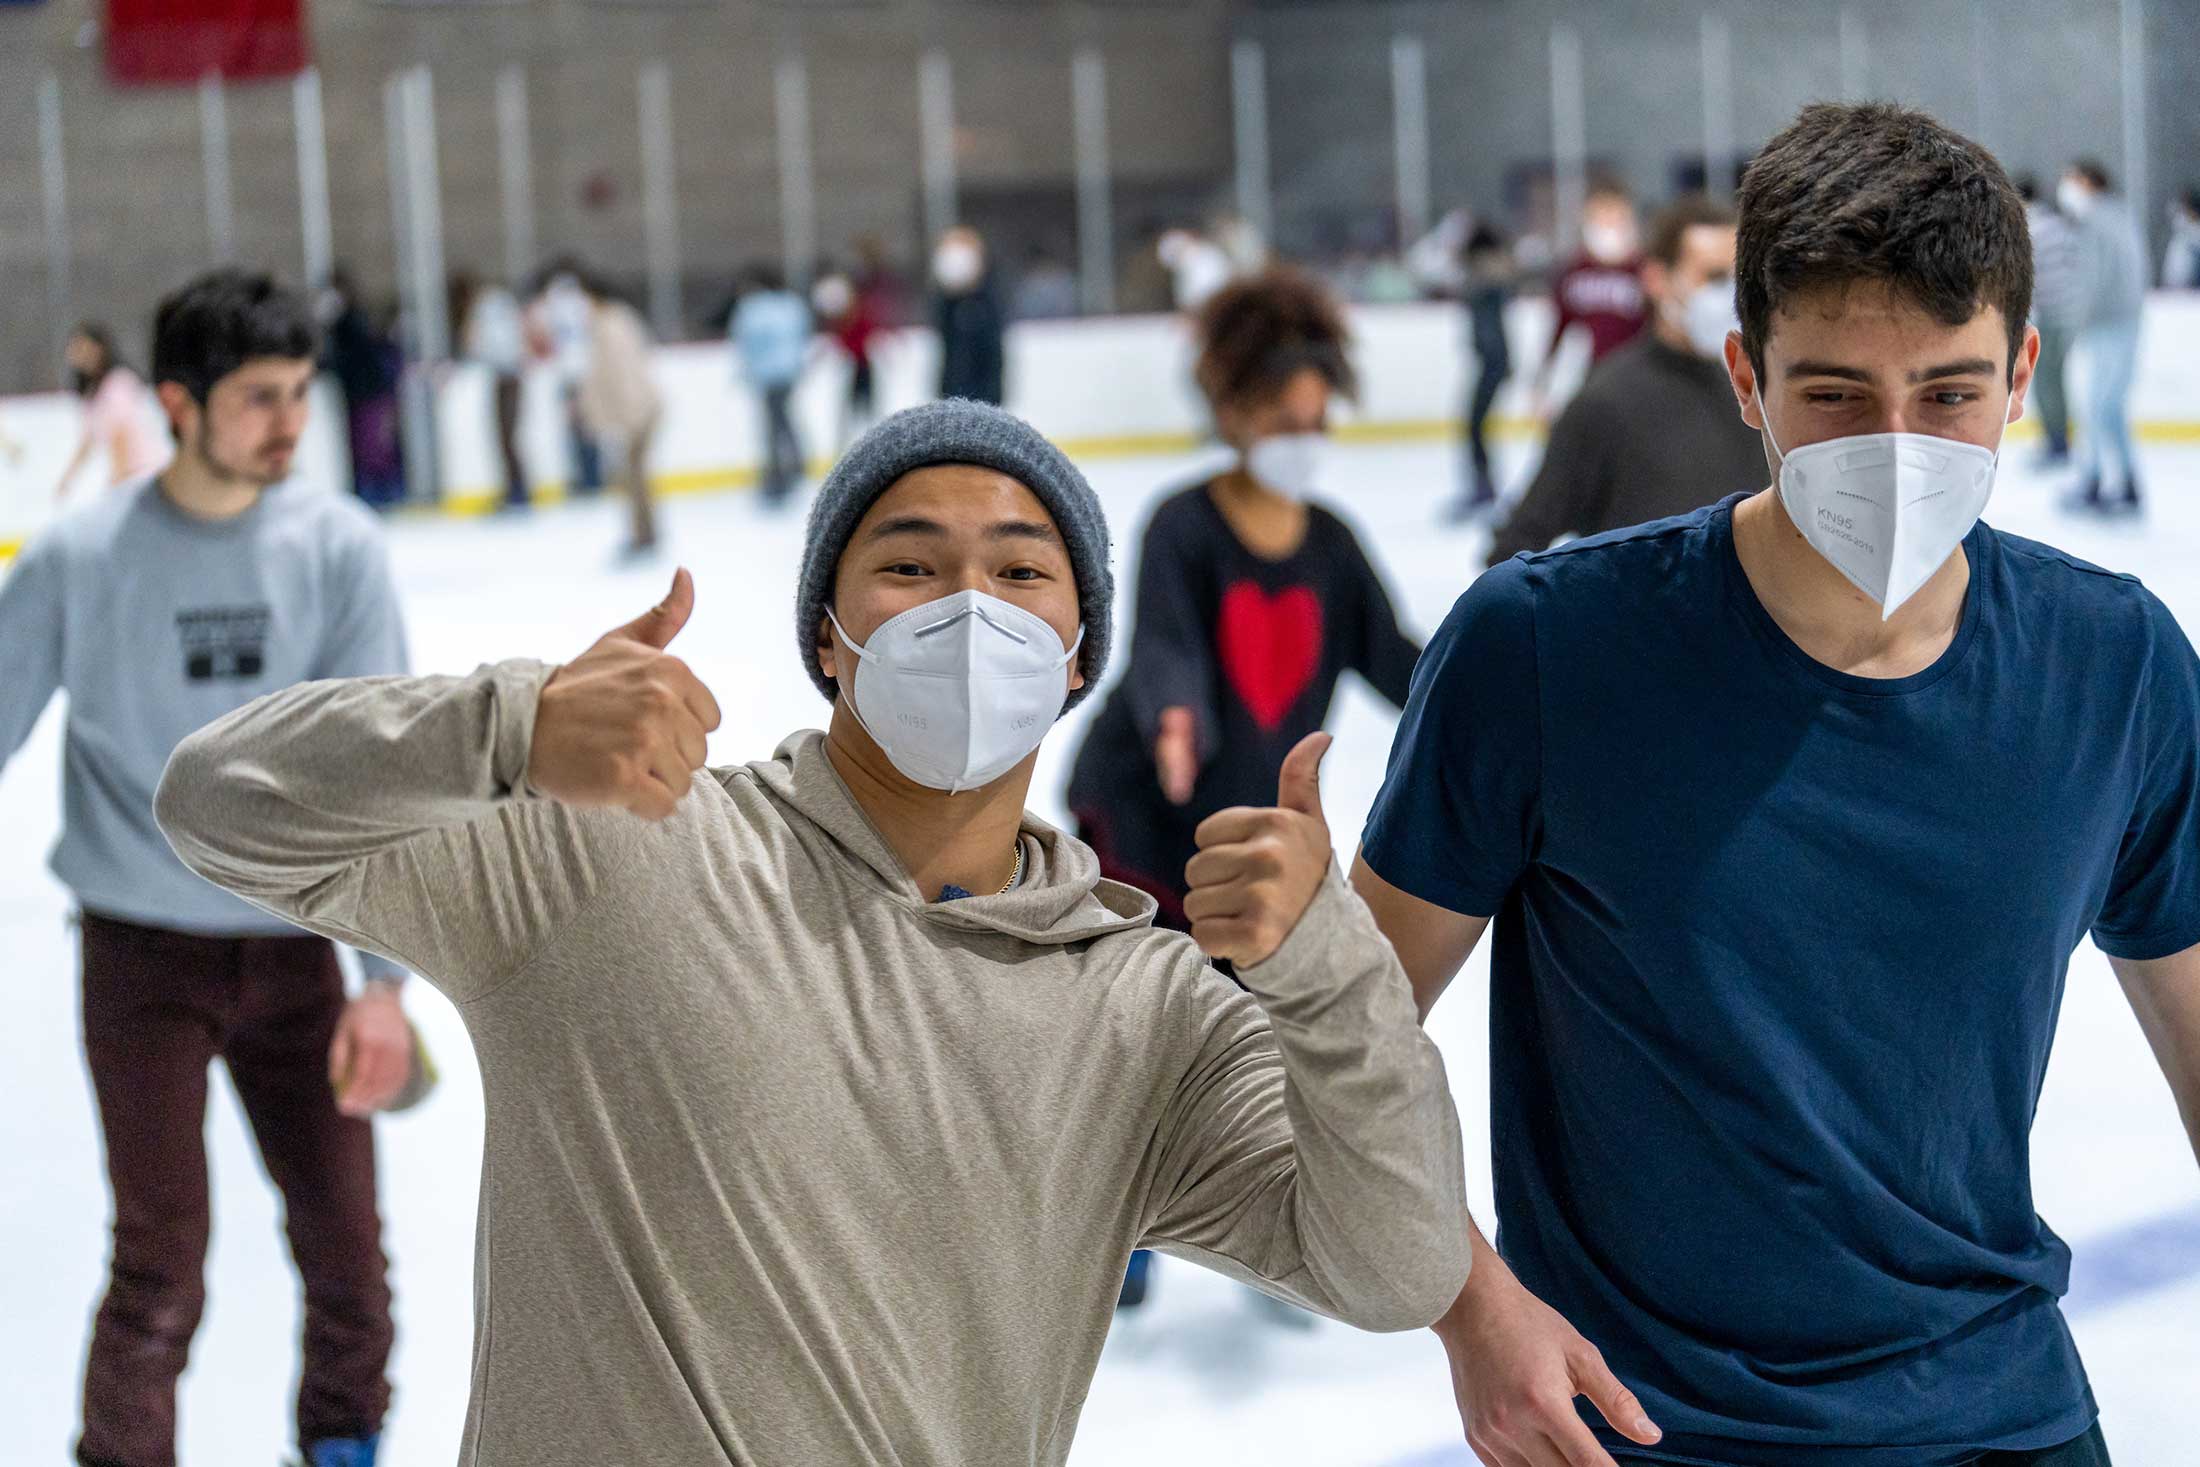 Several men ice skating, one giving a thumbs up gesture.